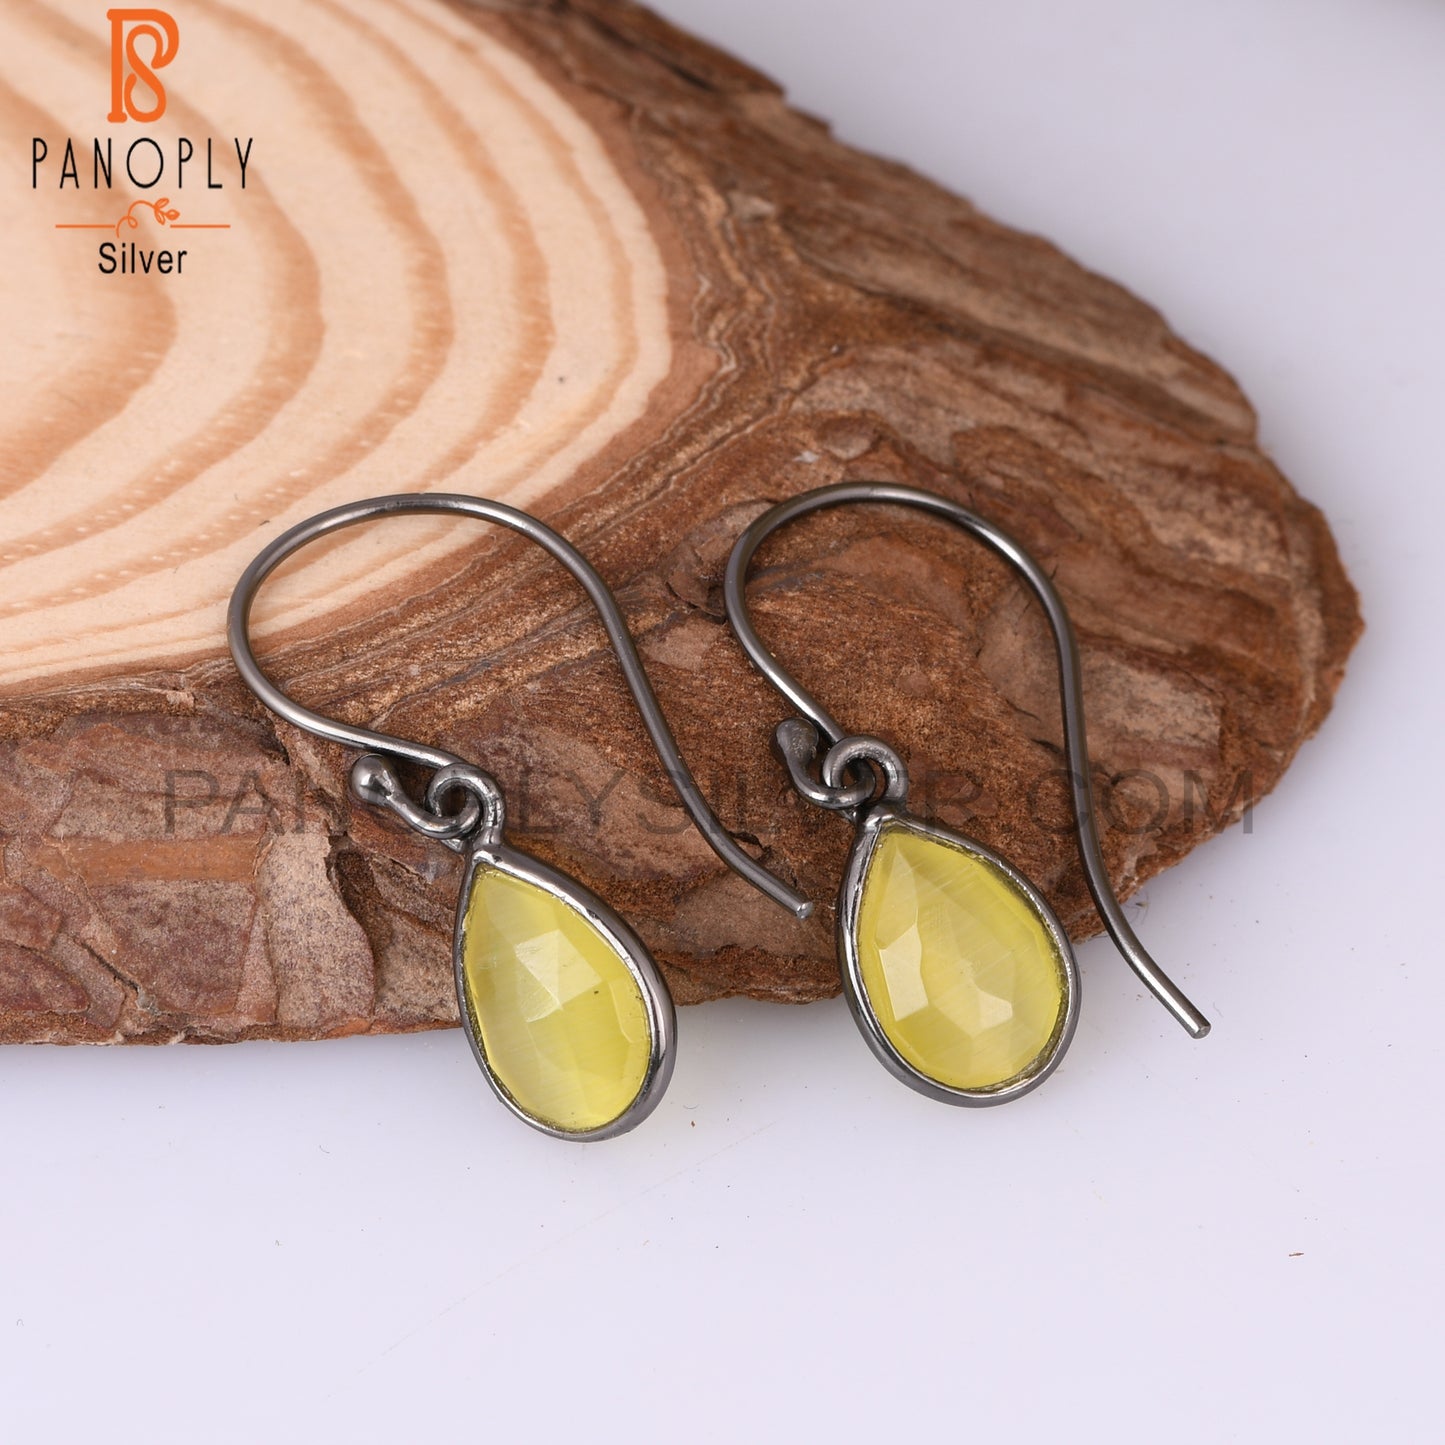 Moonstone Yellow Cultured Pear 925 Sterling Silver Earrings